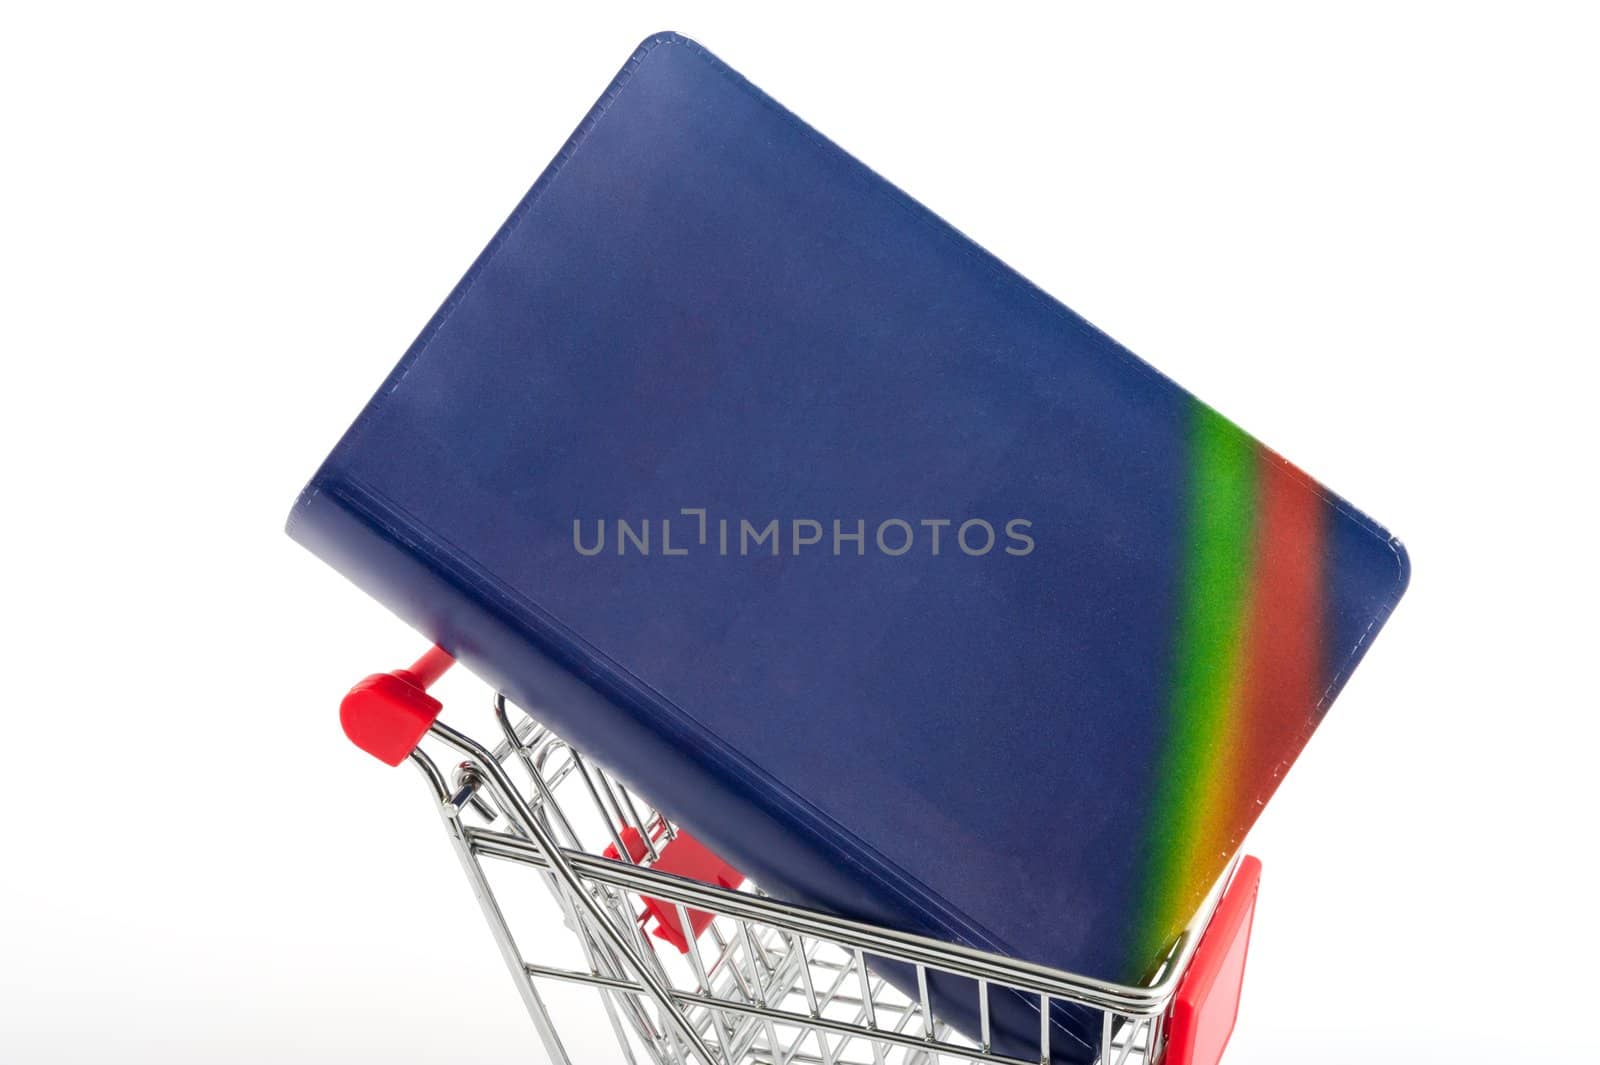 Book in a shopping cart isolated on white